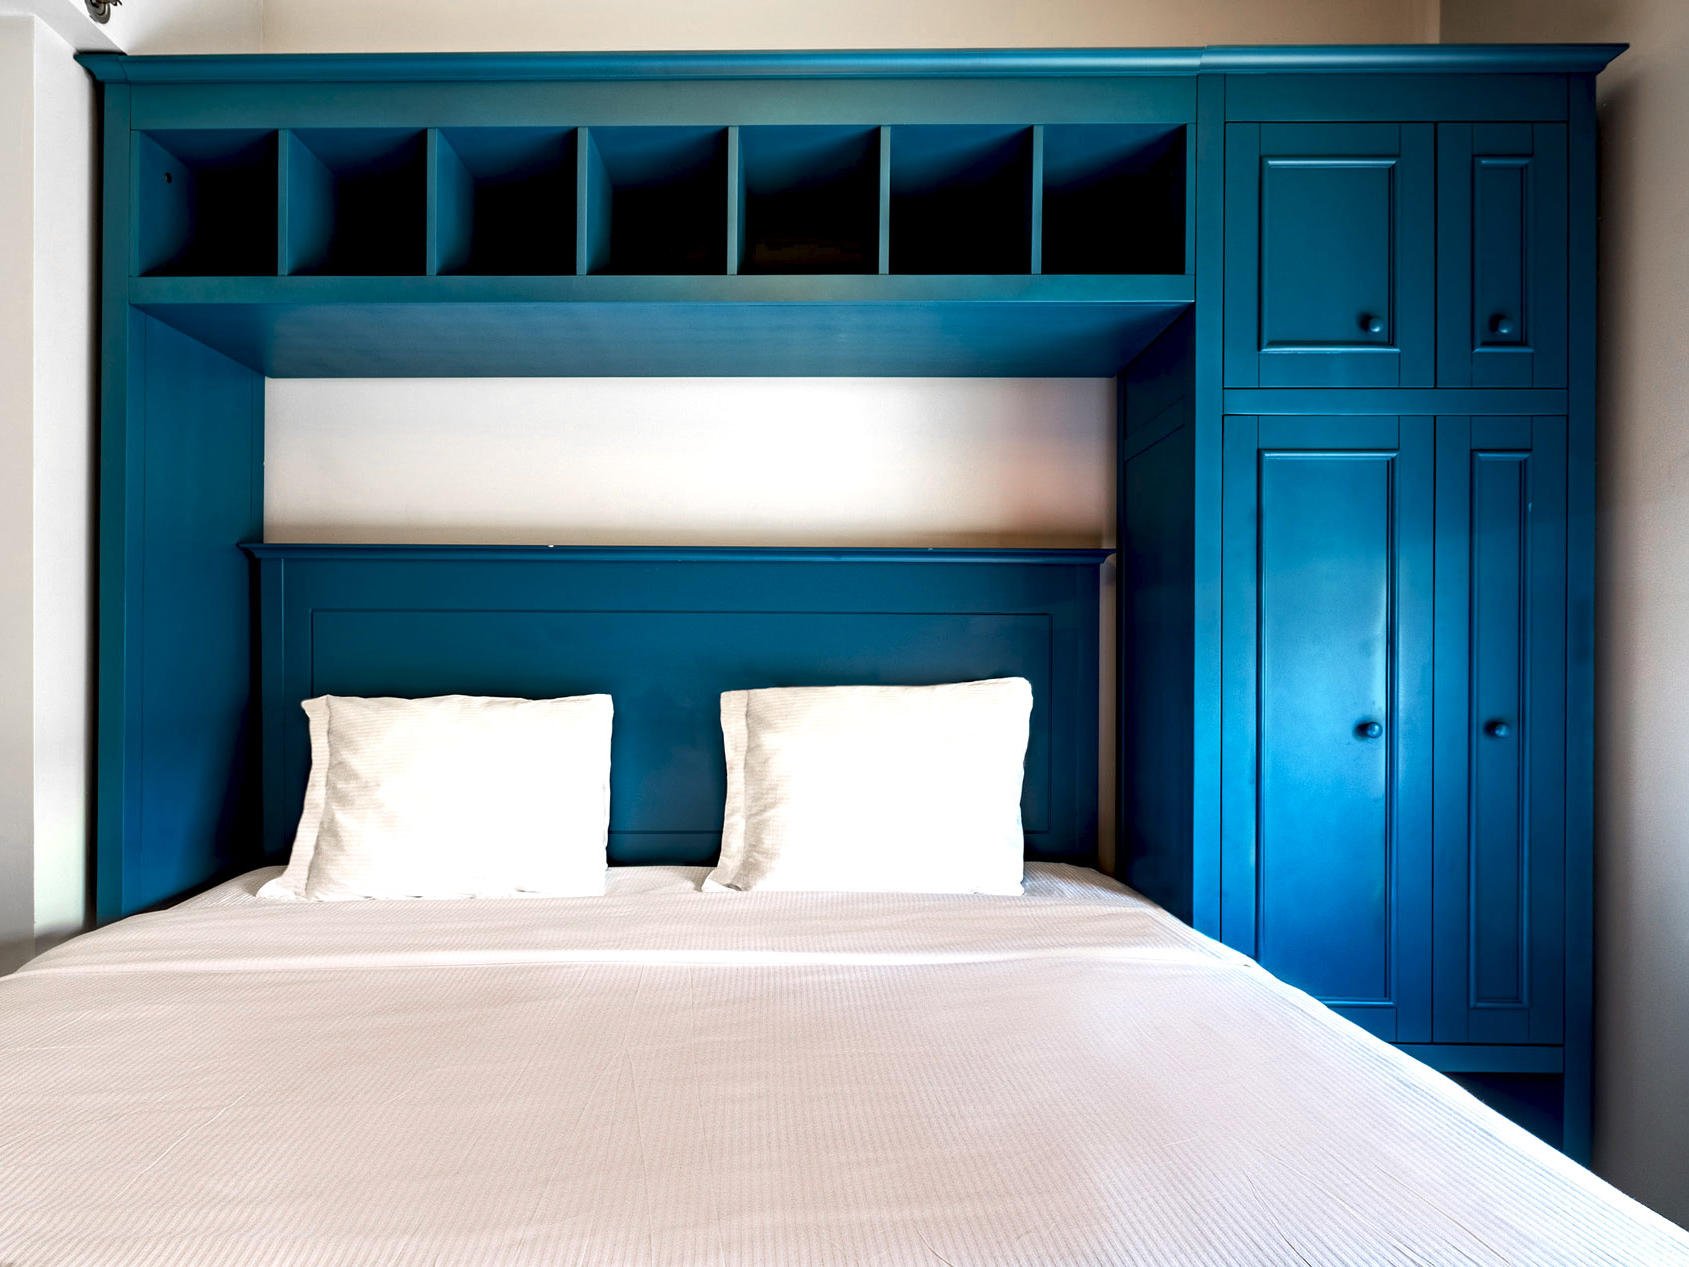 Queen bed with blue frame and cabinets